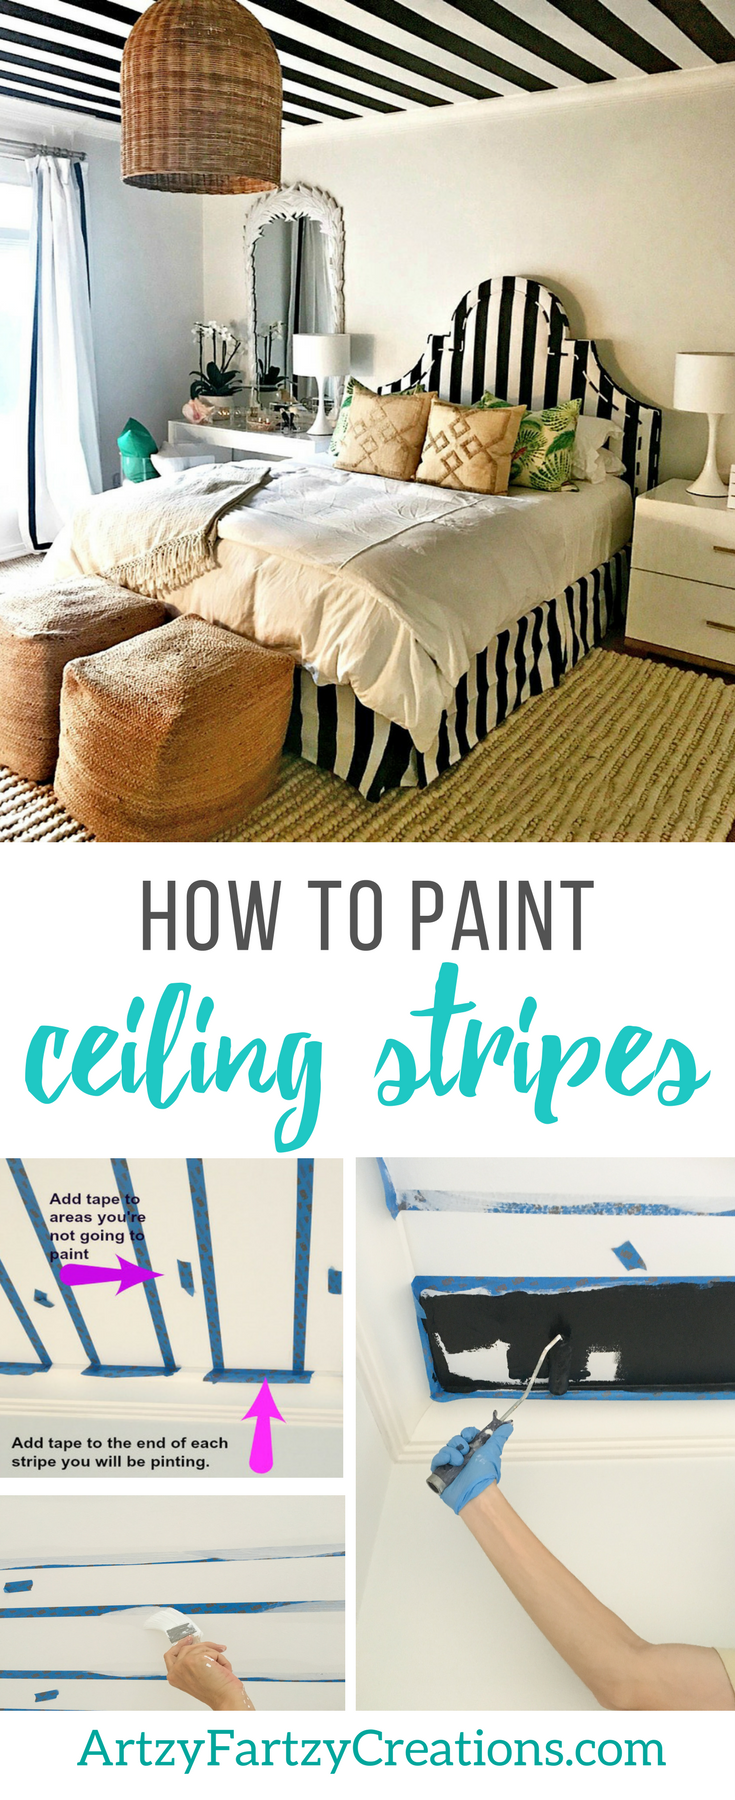 Black and White Striped Ceiling by Cheryl Phan | How to Paint Ceiling Stripes | Painted Ceiling Ideas | Bedroom Decorating Ideas 